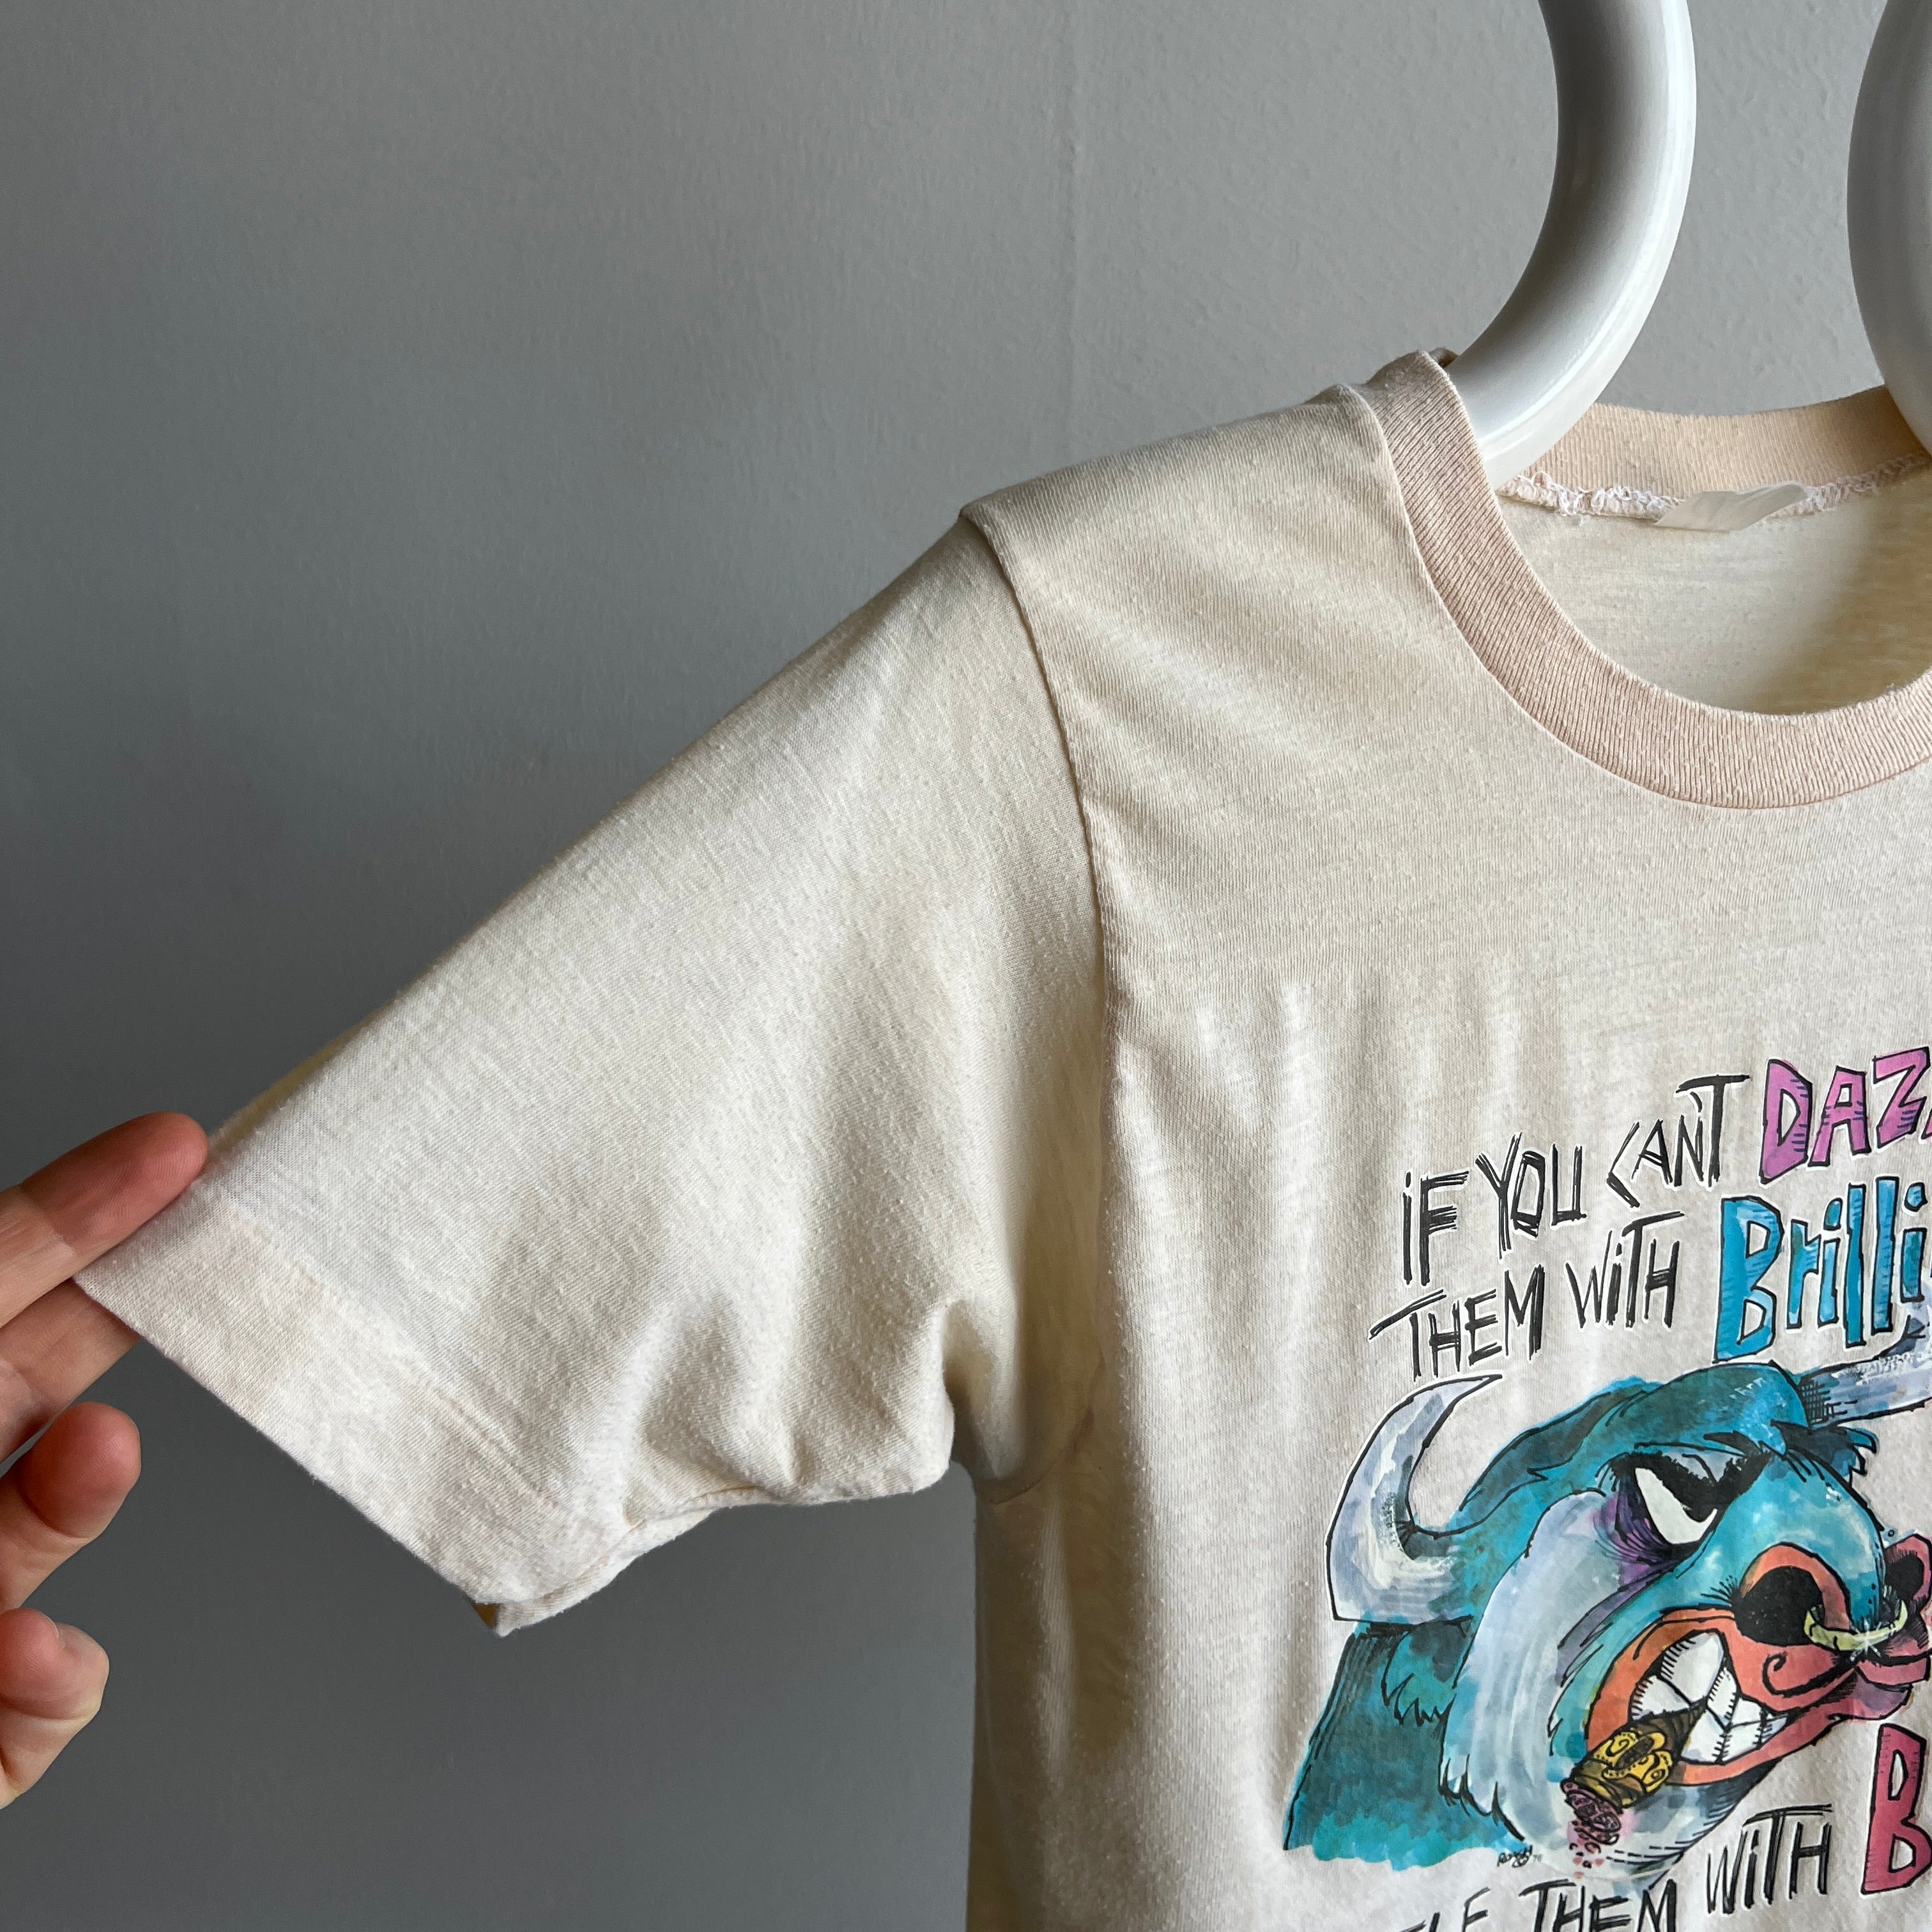 1970s If you can't dazzle them with brilliance, baffle them with bull T-Shirt